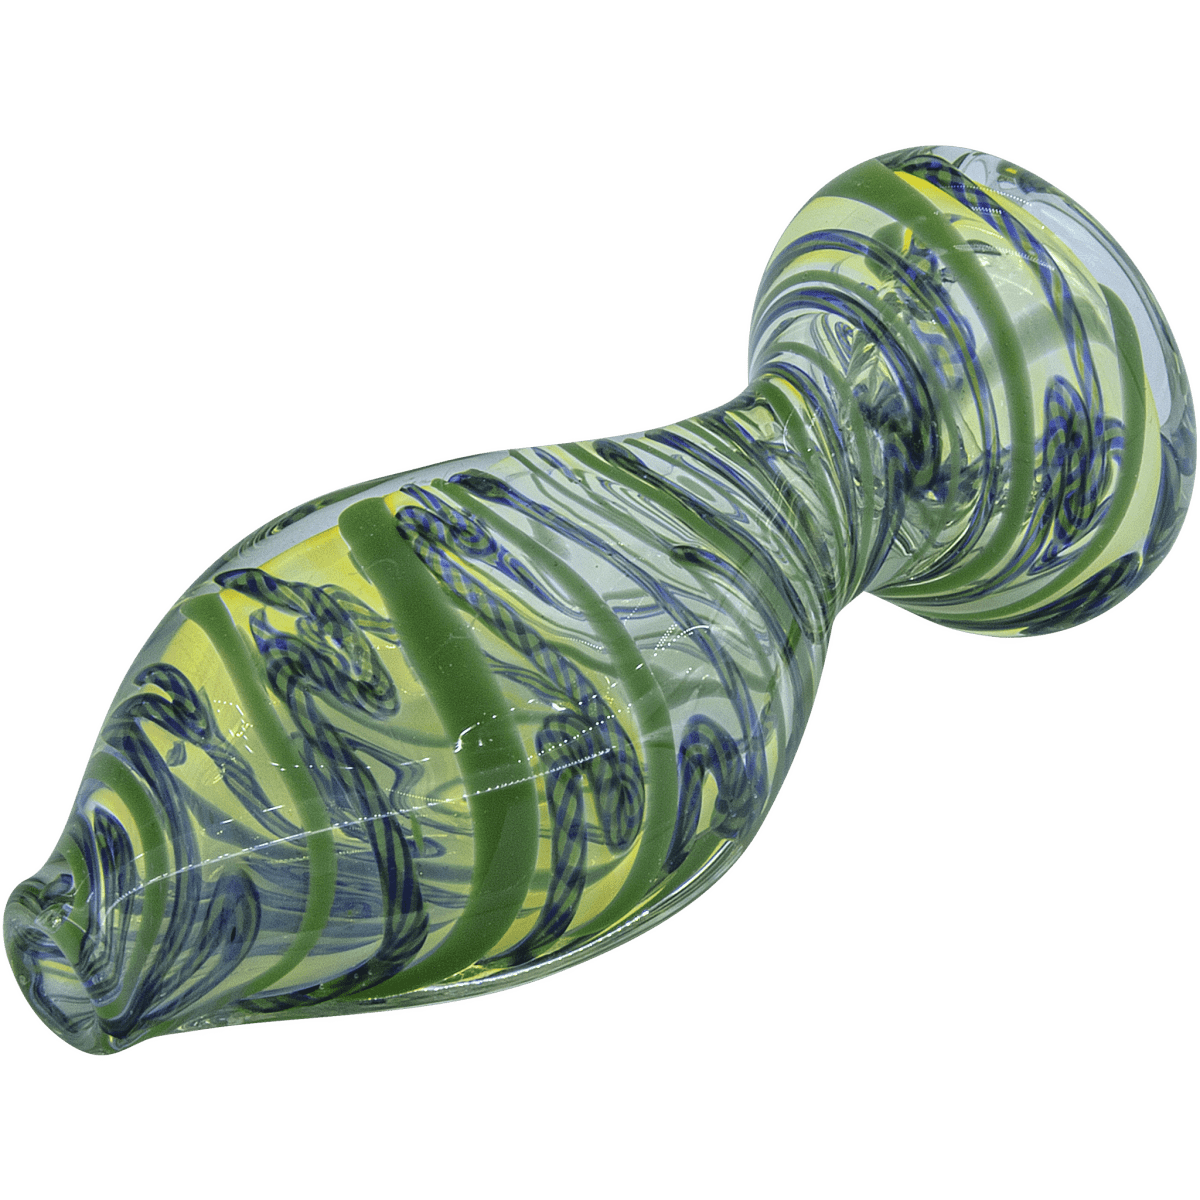 LA Pipes Hand Pipe Green Hues "Flat Belly" Inside-Out Chillum